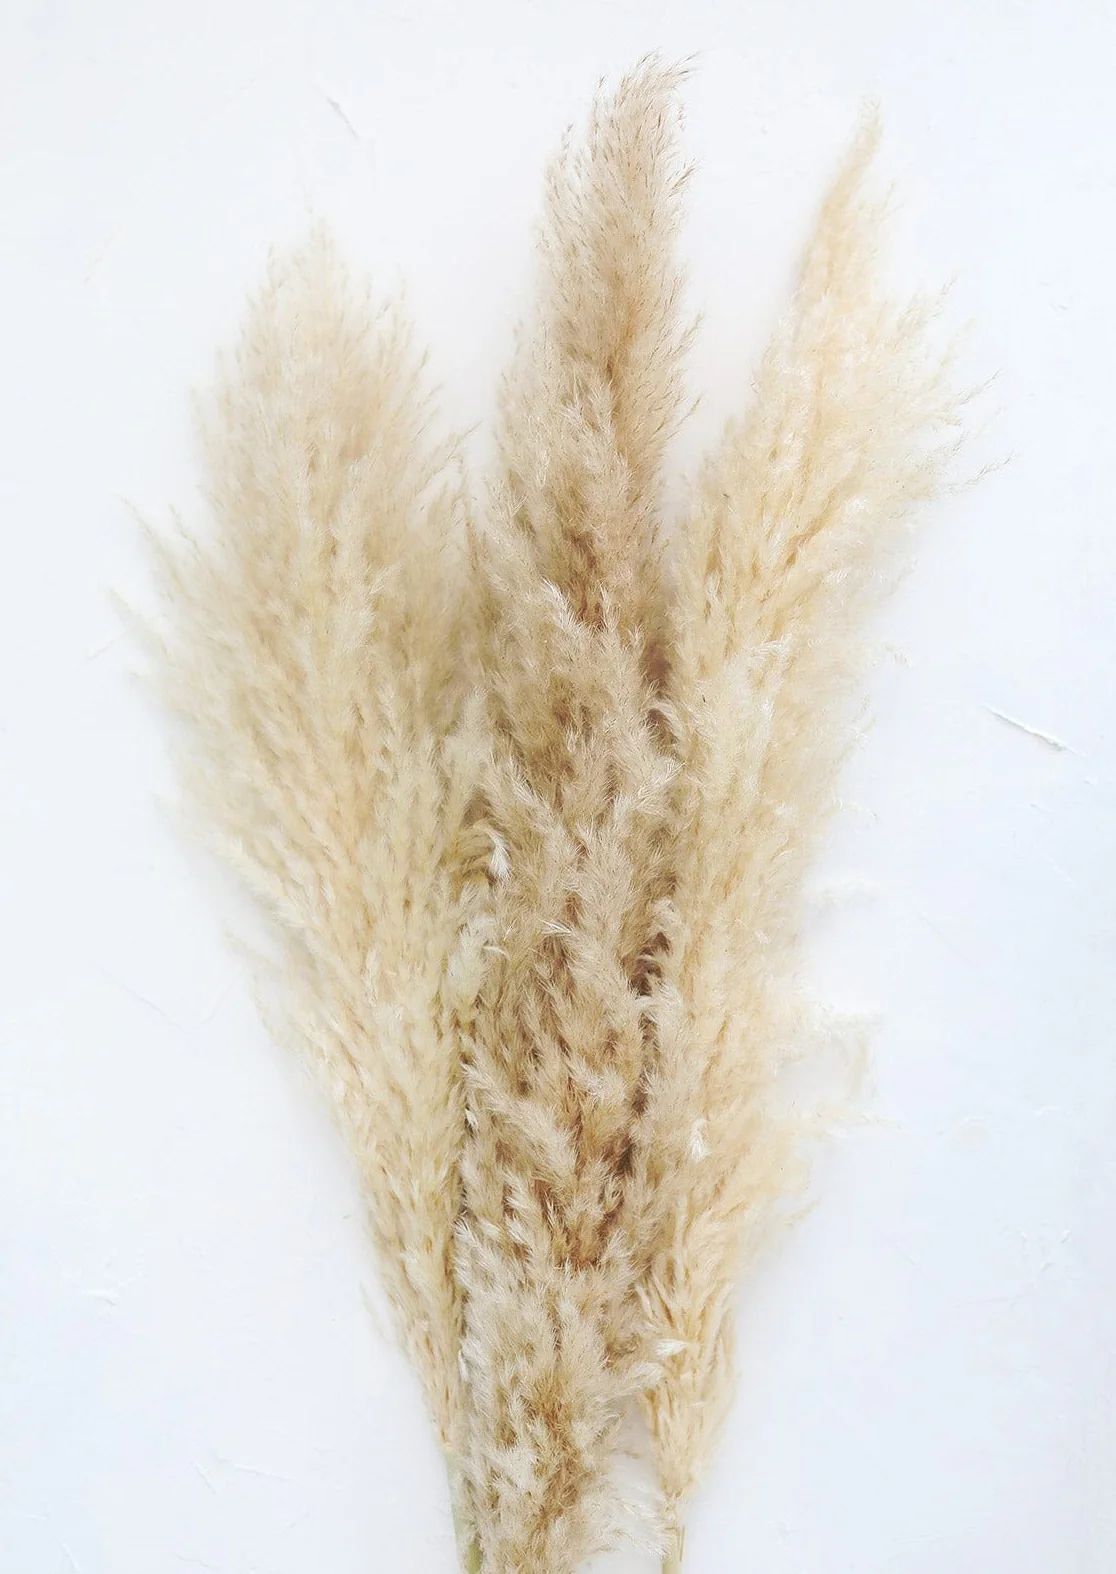 Dried Pampas Grass | Naturally Dried Grasses & Flowers | Afloral.com | Afloral